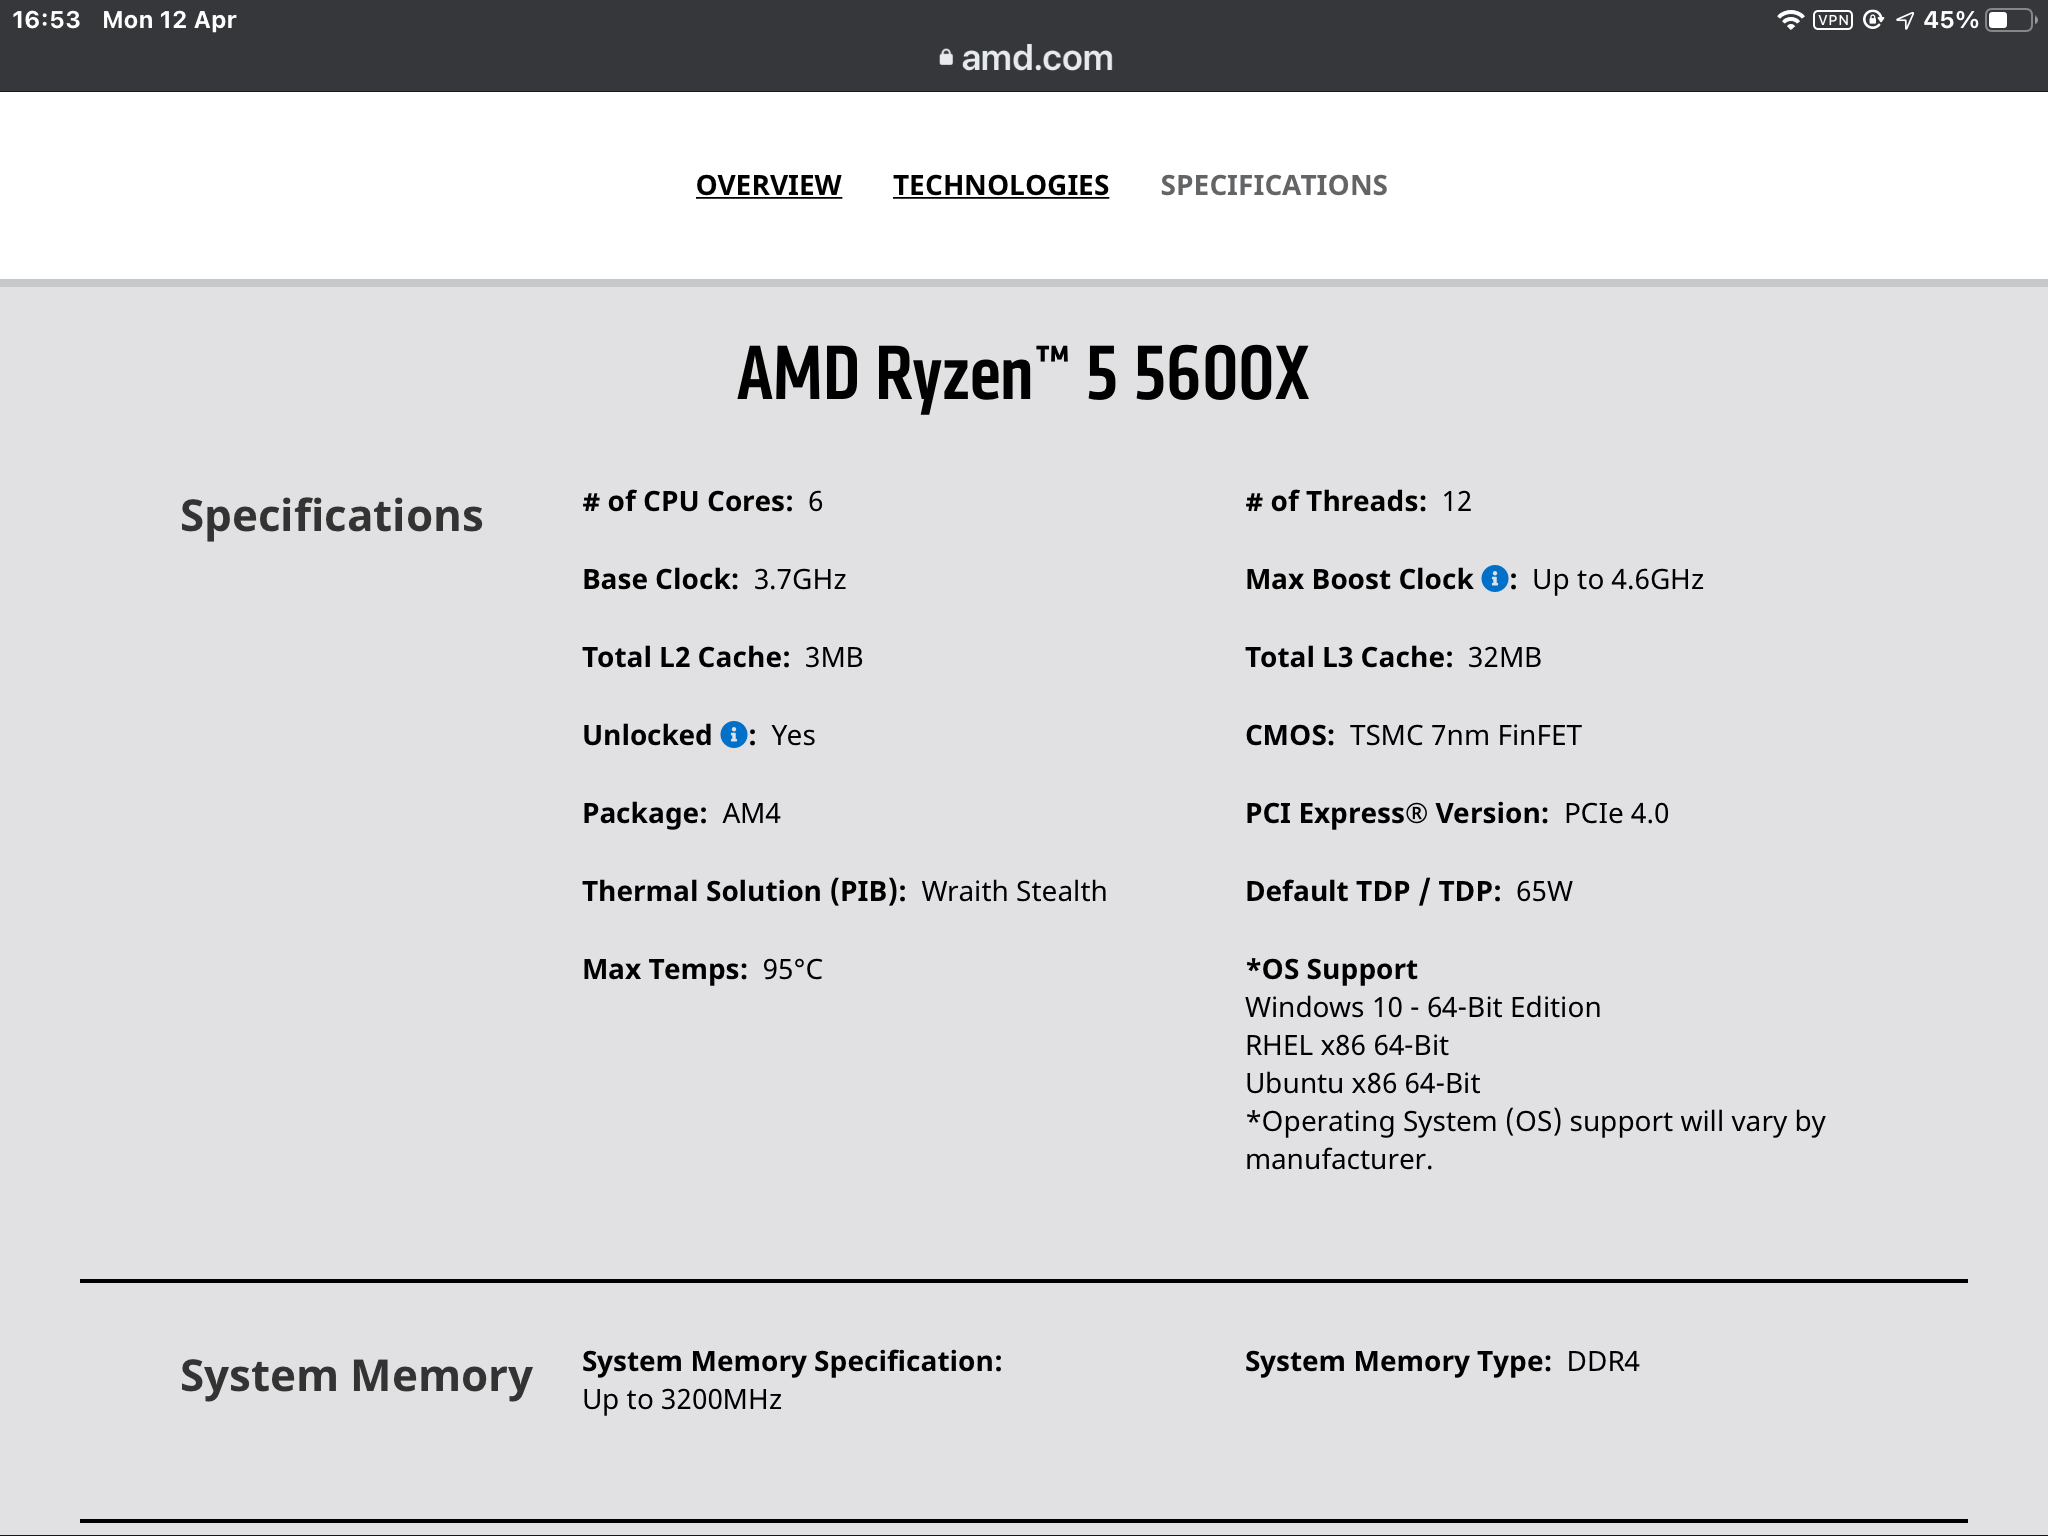 En smule betaling underkjole Recommended RAM speed for Ryzen 5 5600X? - CPUs, Motherboards, and Memory -  Linus Tech Tips